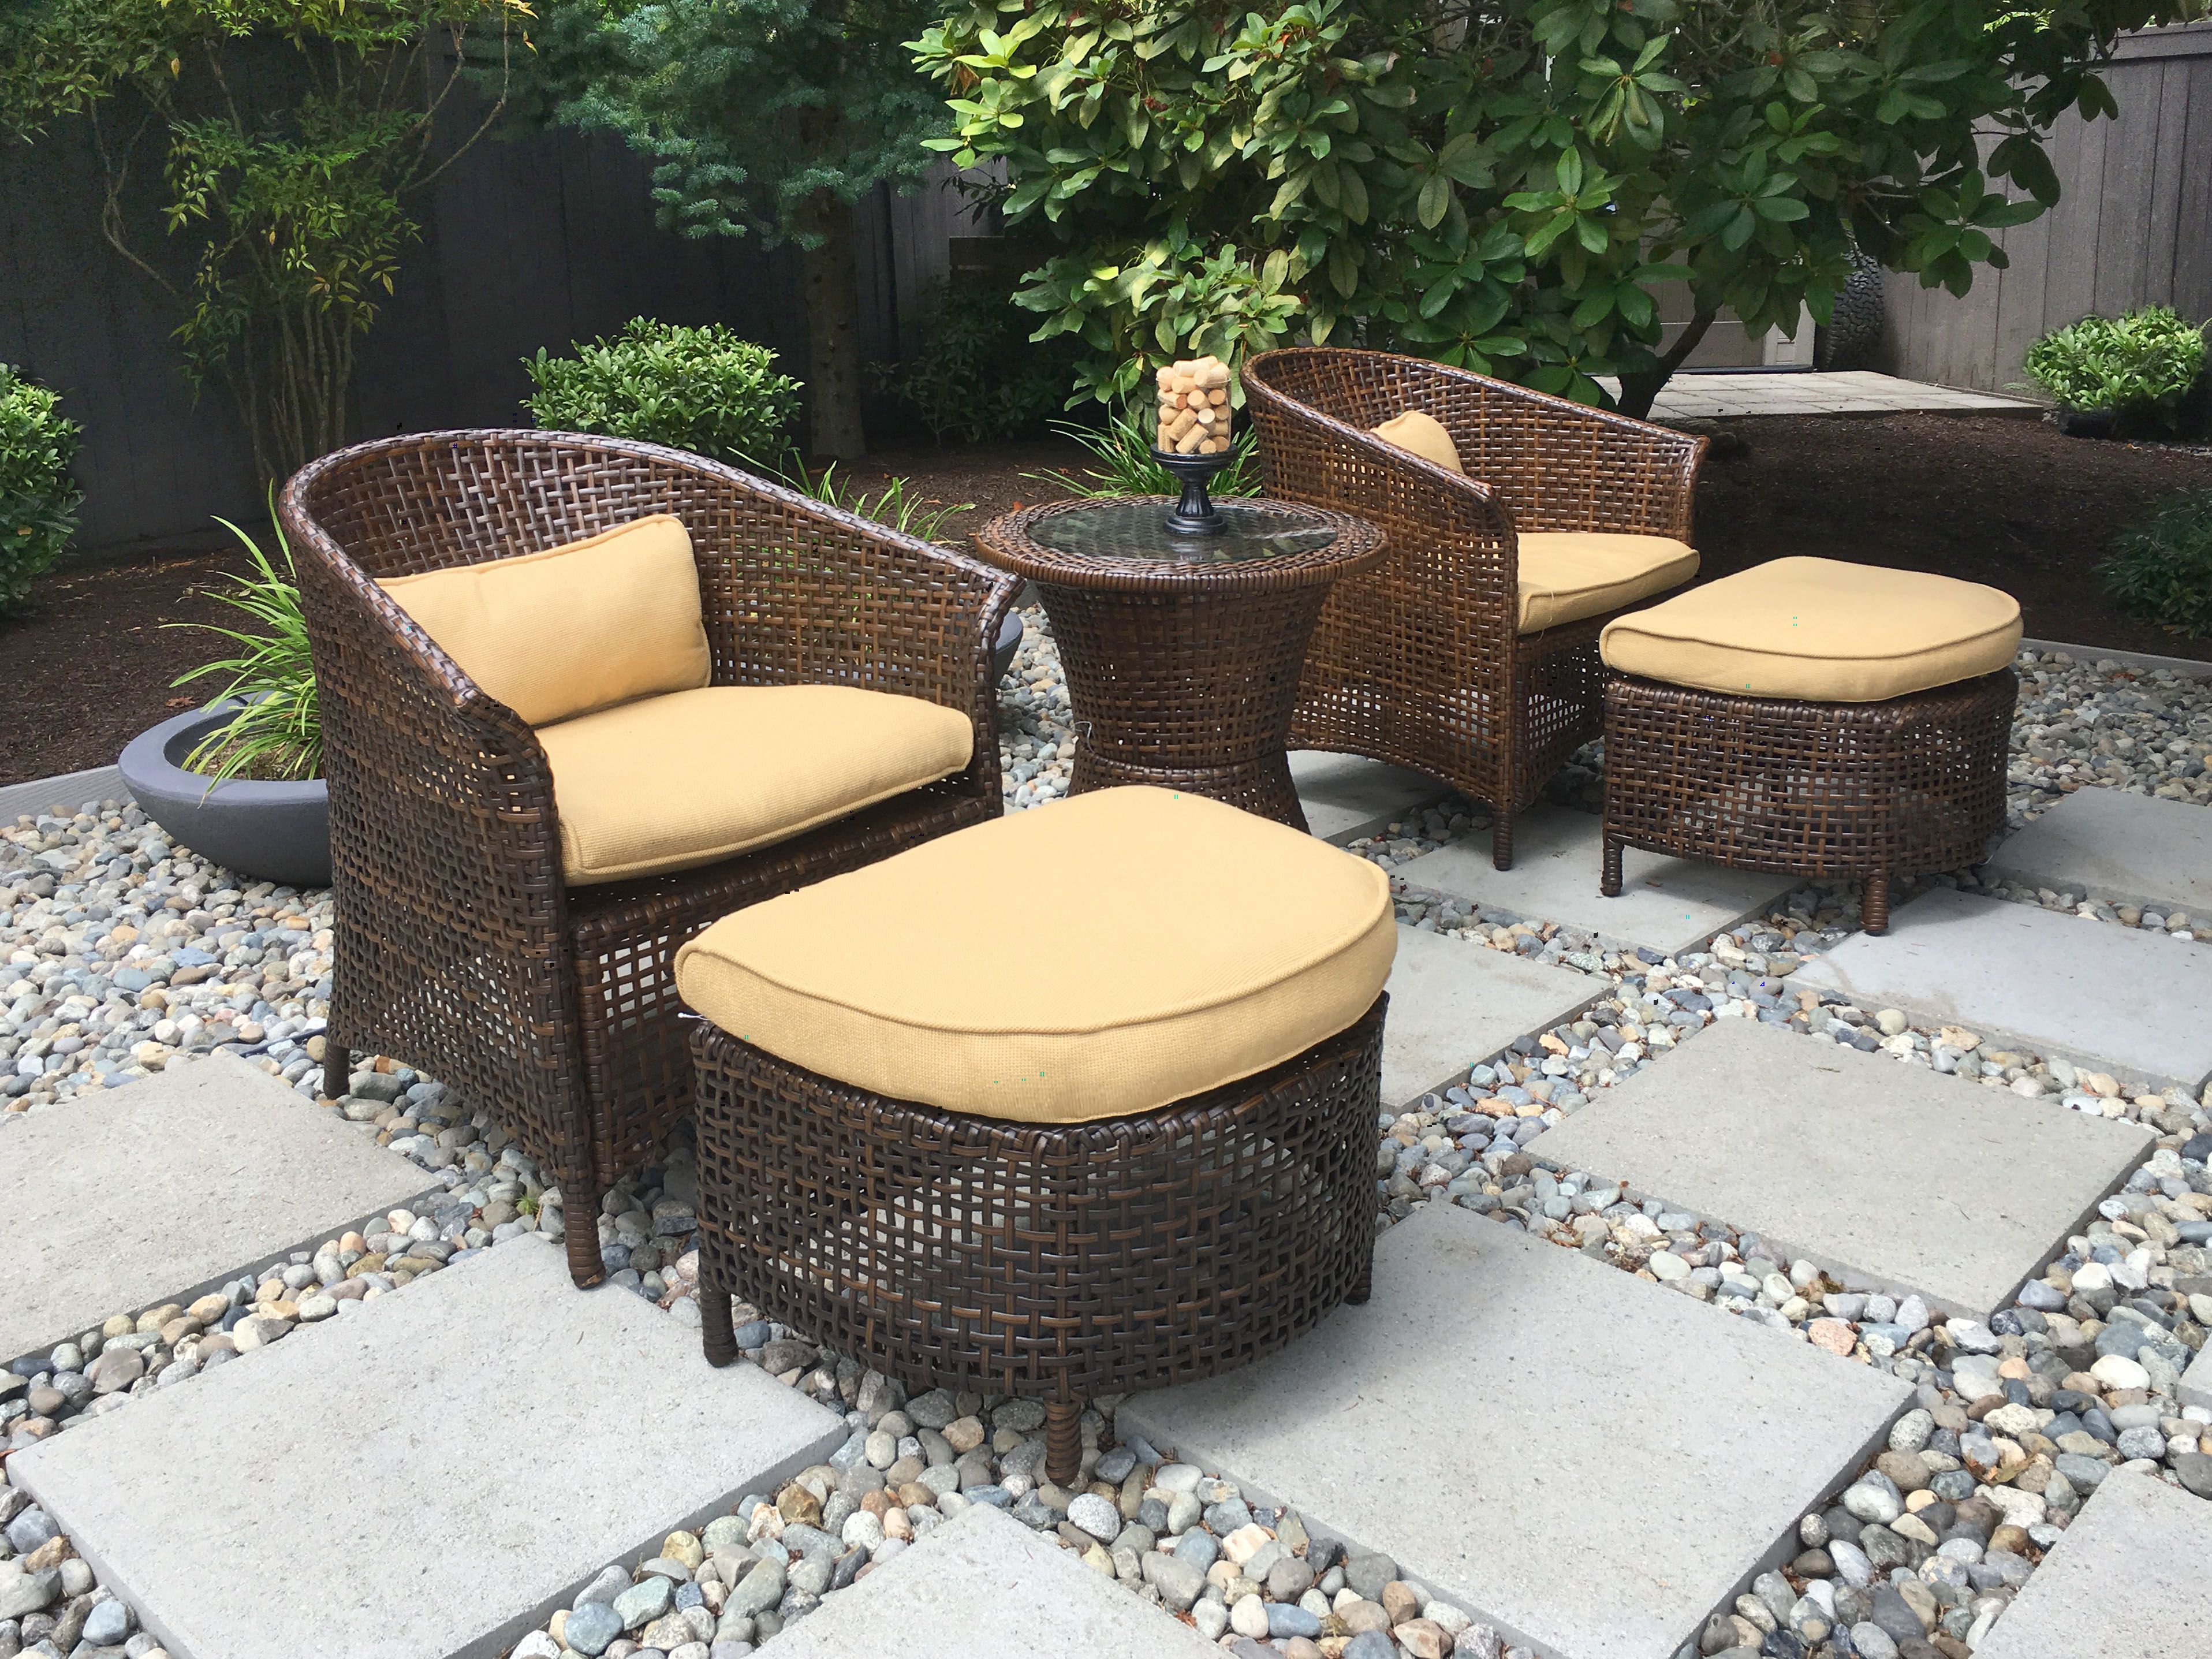 Outdoor Furniture Set - Wicker new - 5-piece - great for small spaces, Sunbrella